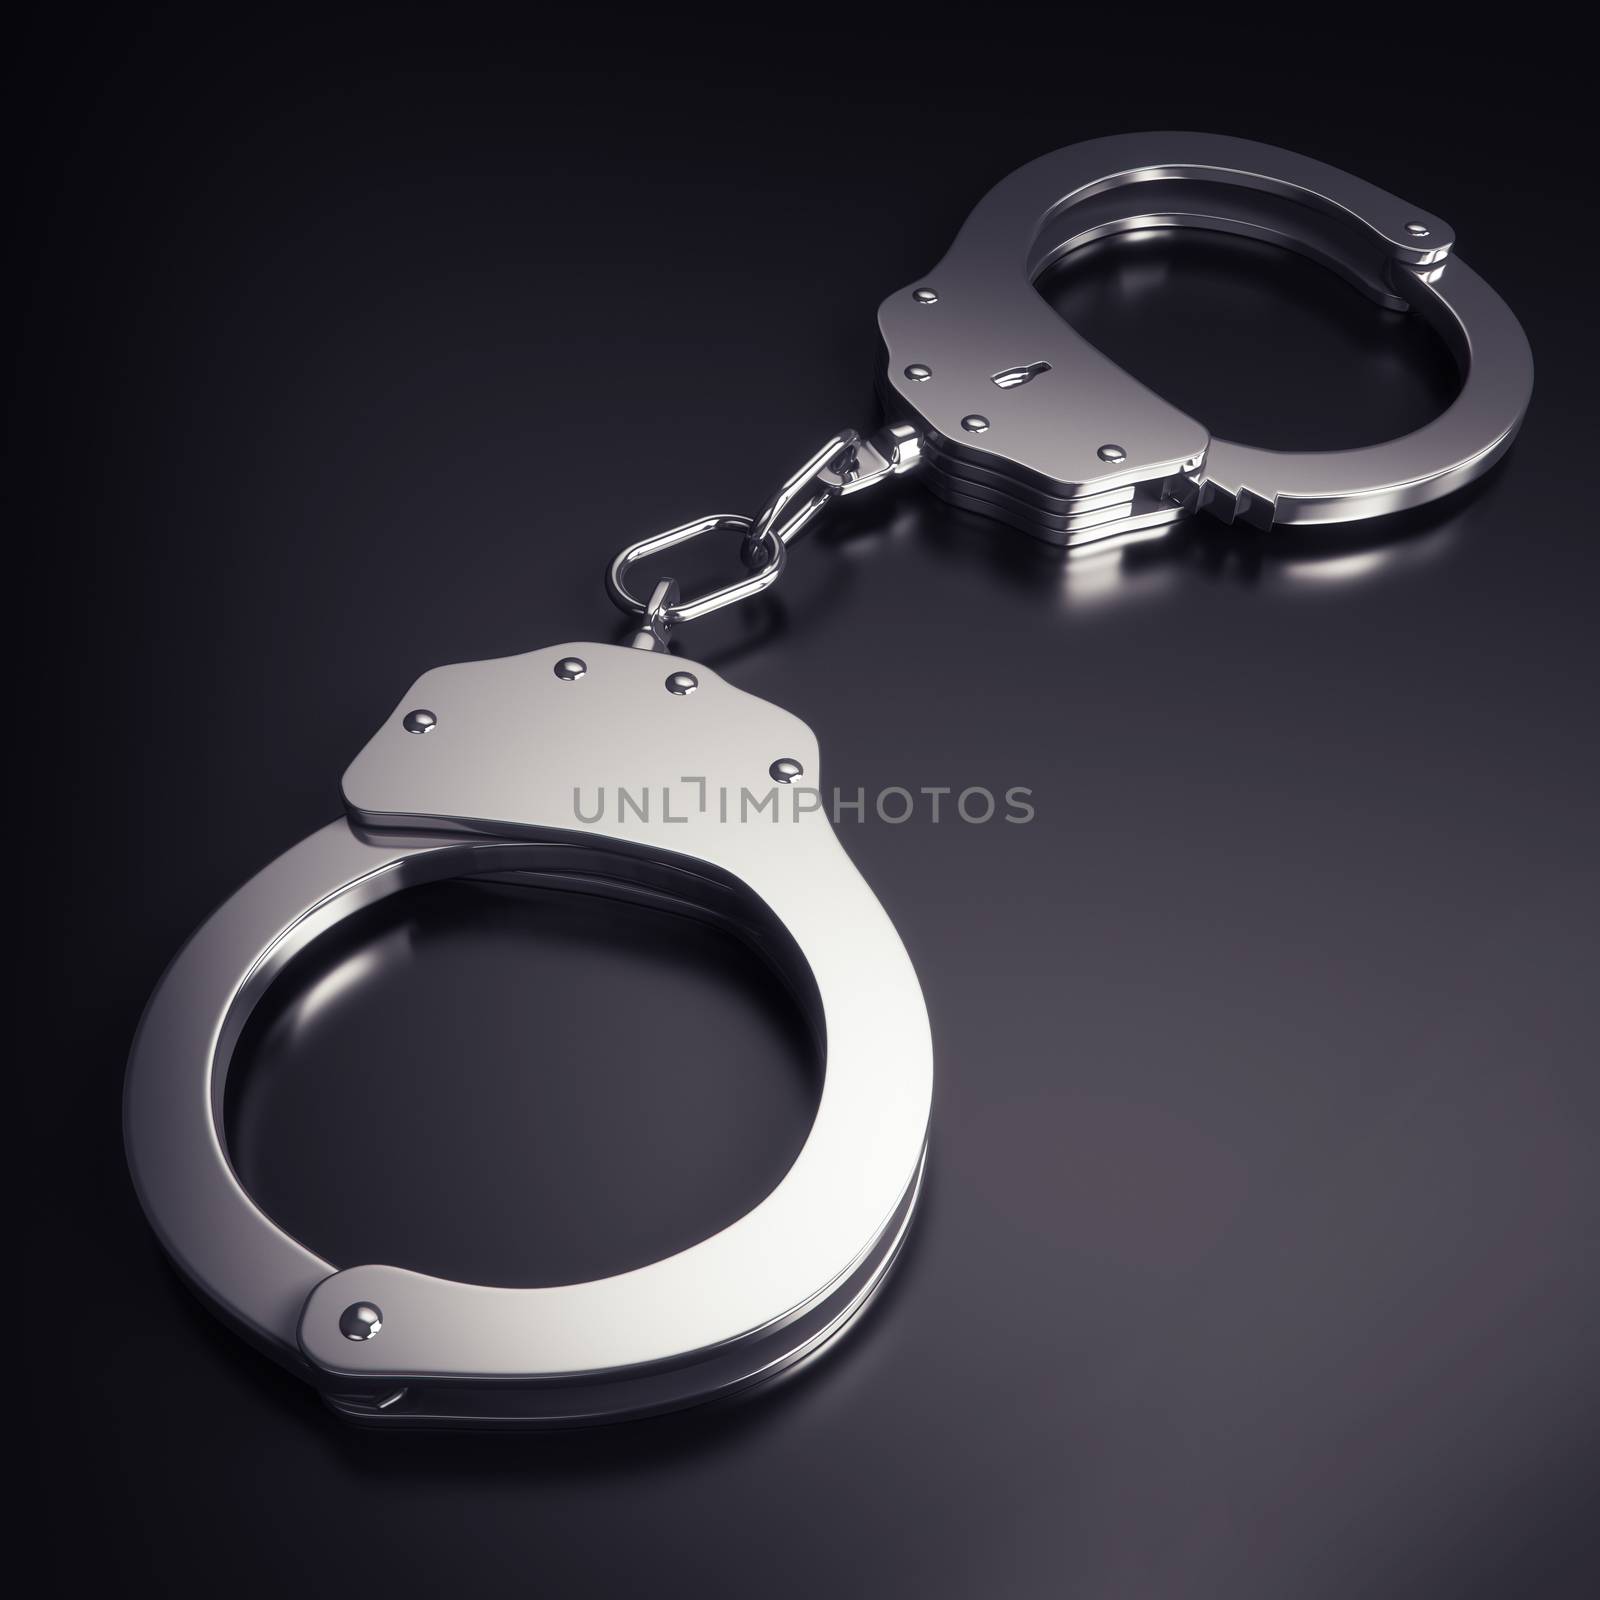 handcuffs isolated on black background with clipping path